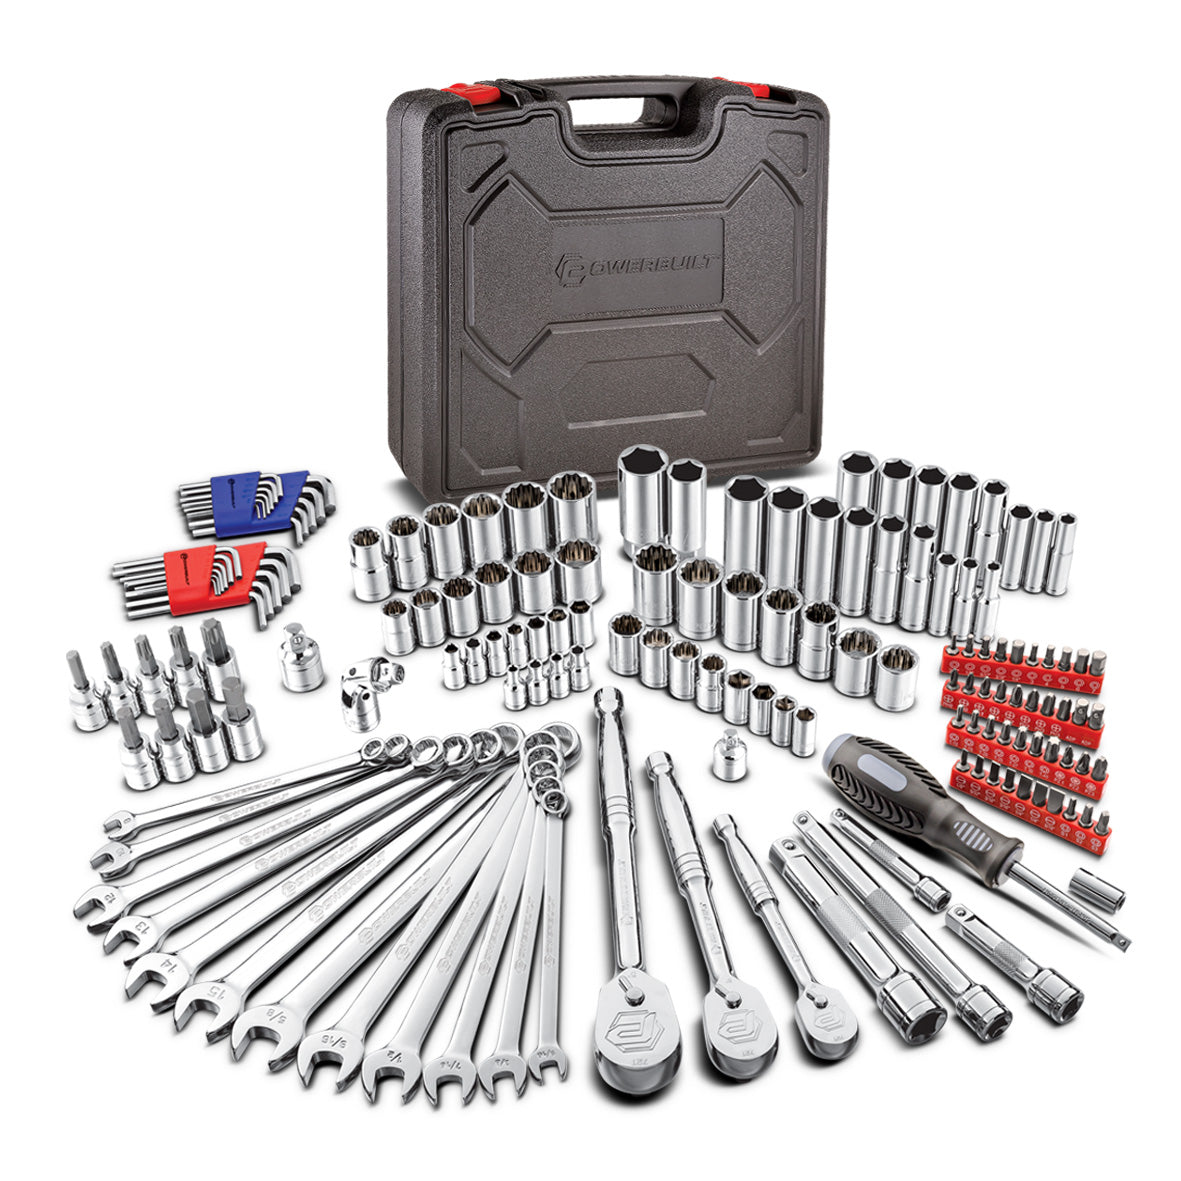 WORKPRO 123PC New Mechanic Tool Set For Car Home Tool Kits Quick Release  Ratchet Handle Wrench Socket Set